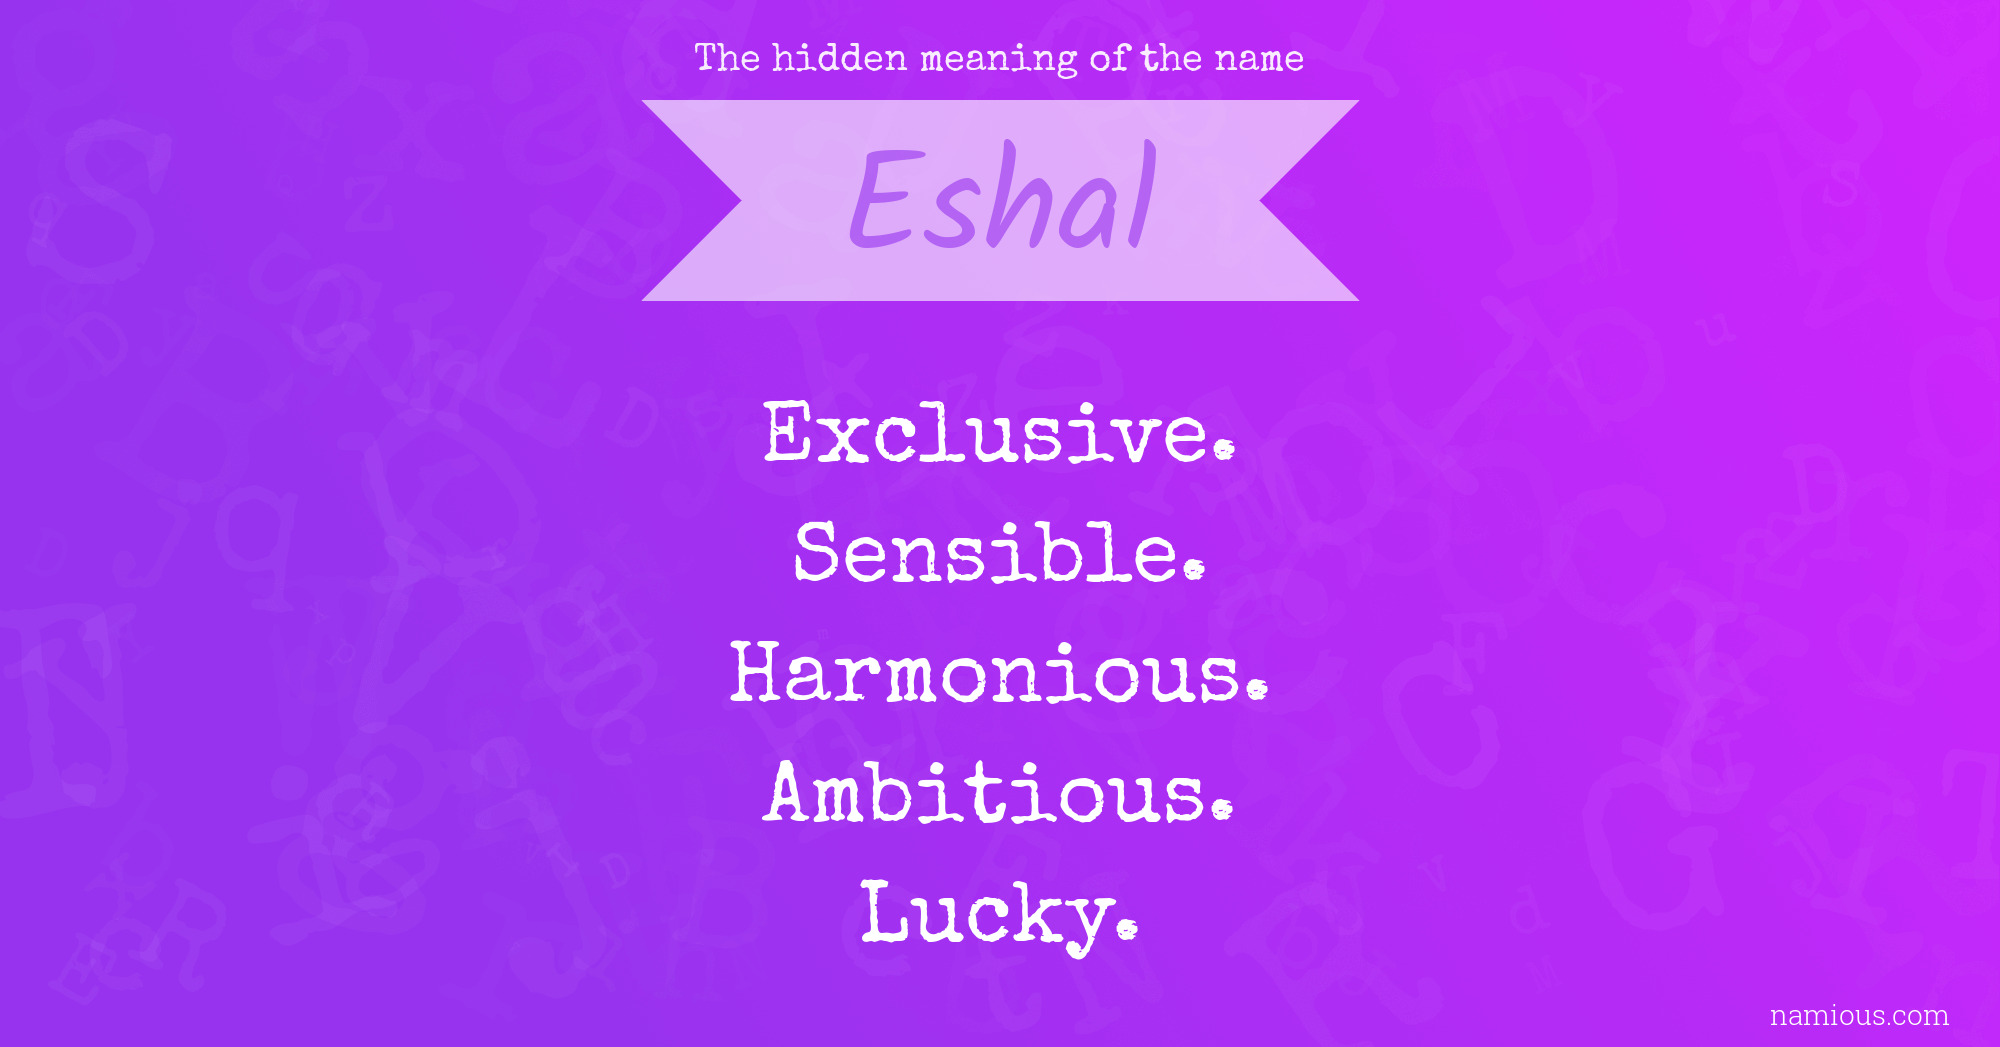 The hidden meaning of the name Eshal